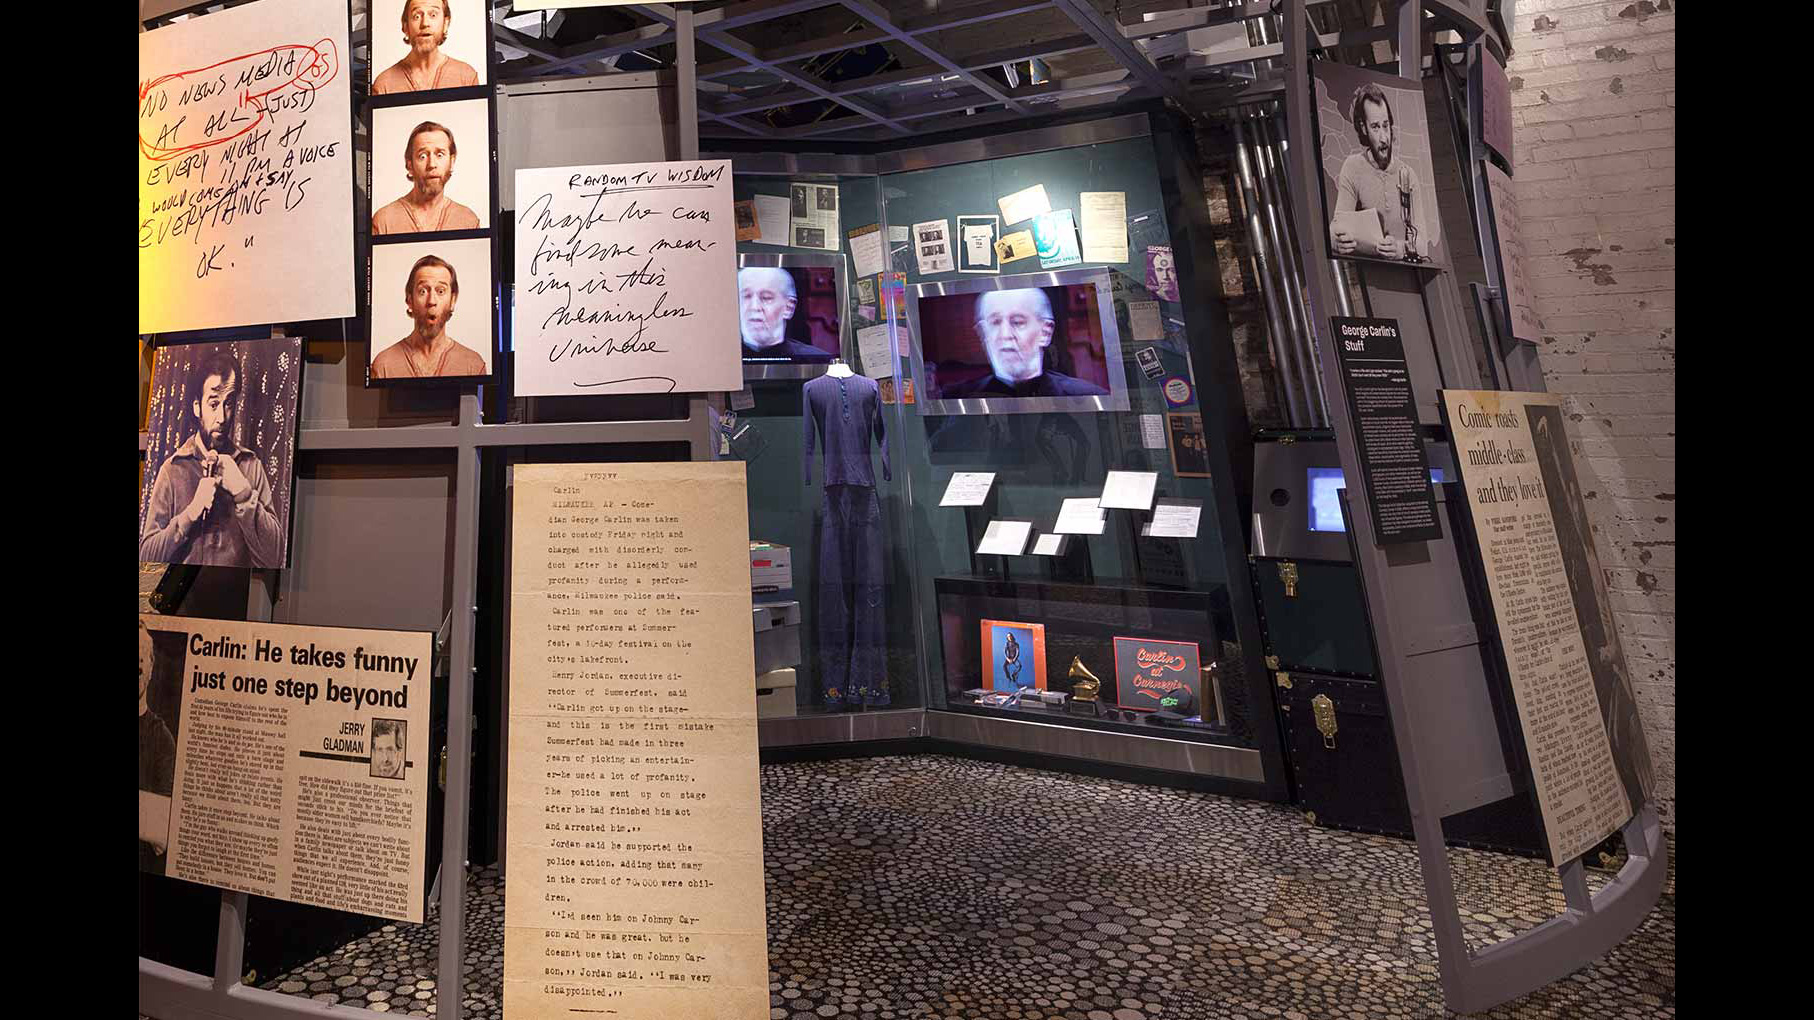 George Carlin archival exhibition at the National Comedy Center